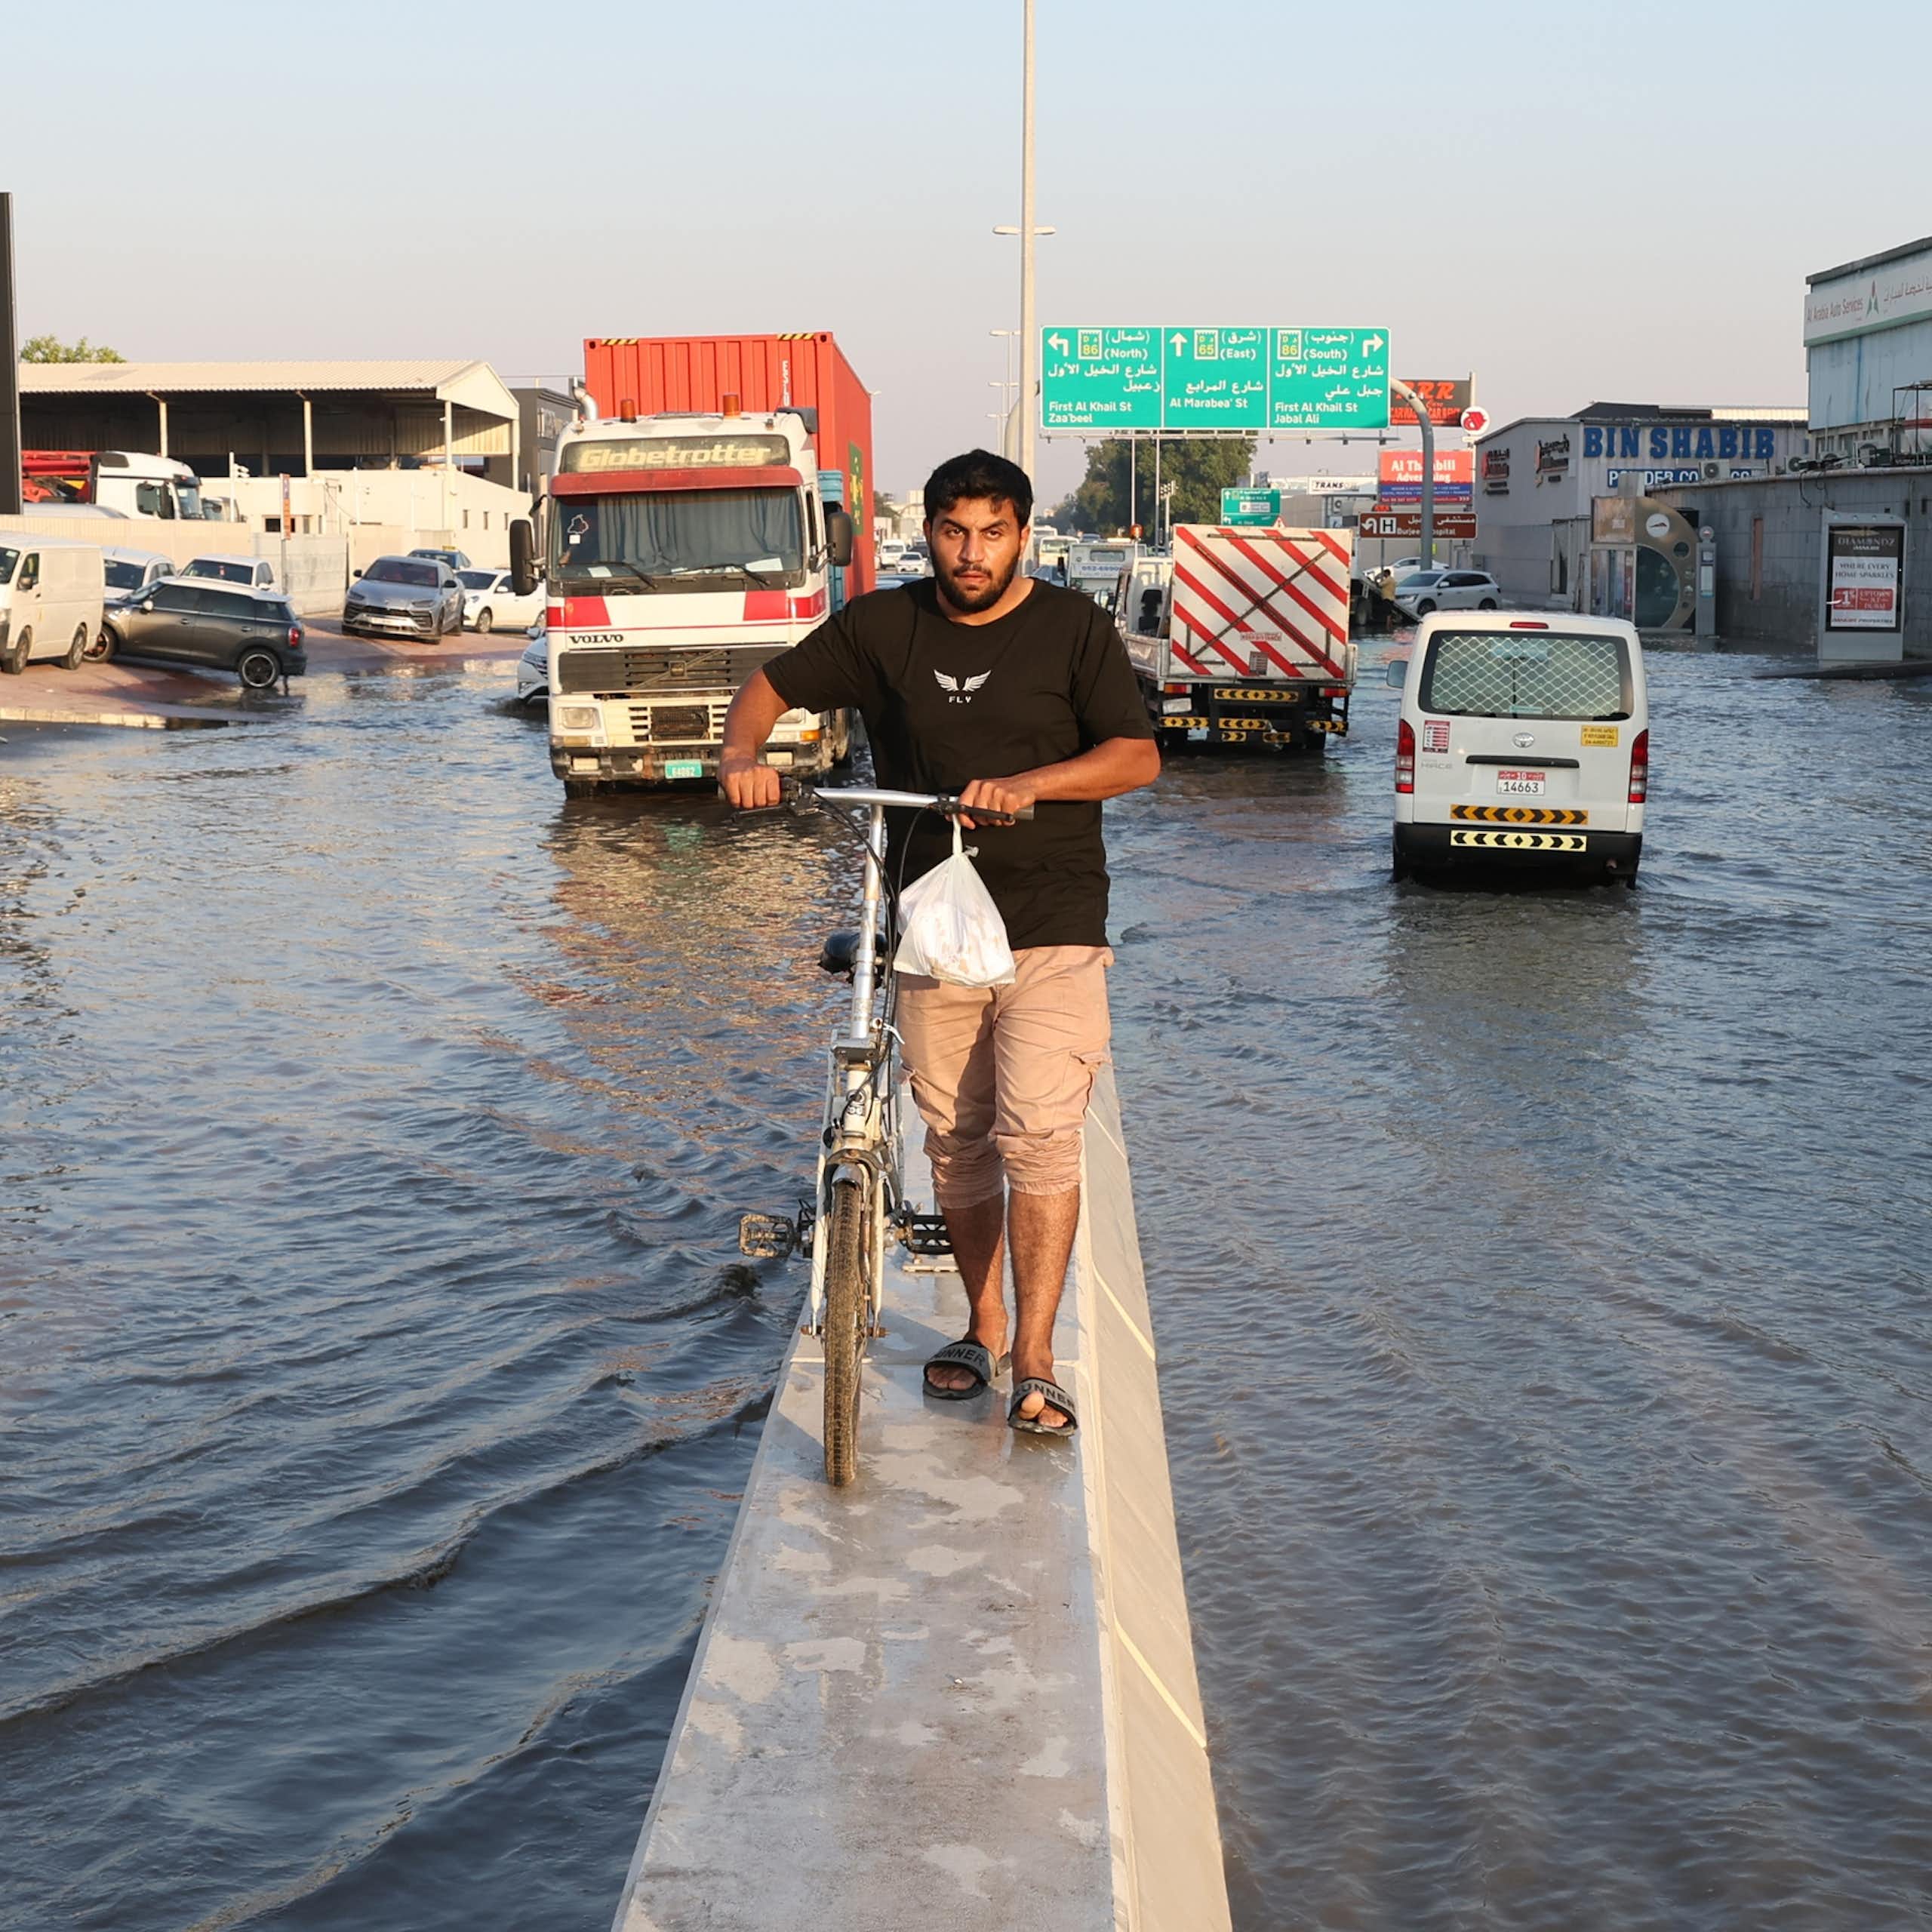 A man wheels a bicycle atop the diving barrier of a flooded motorway.